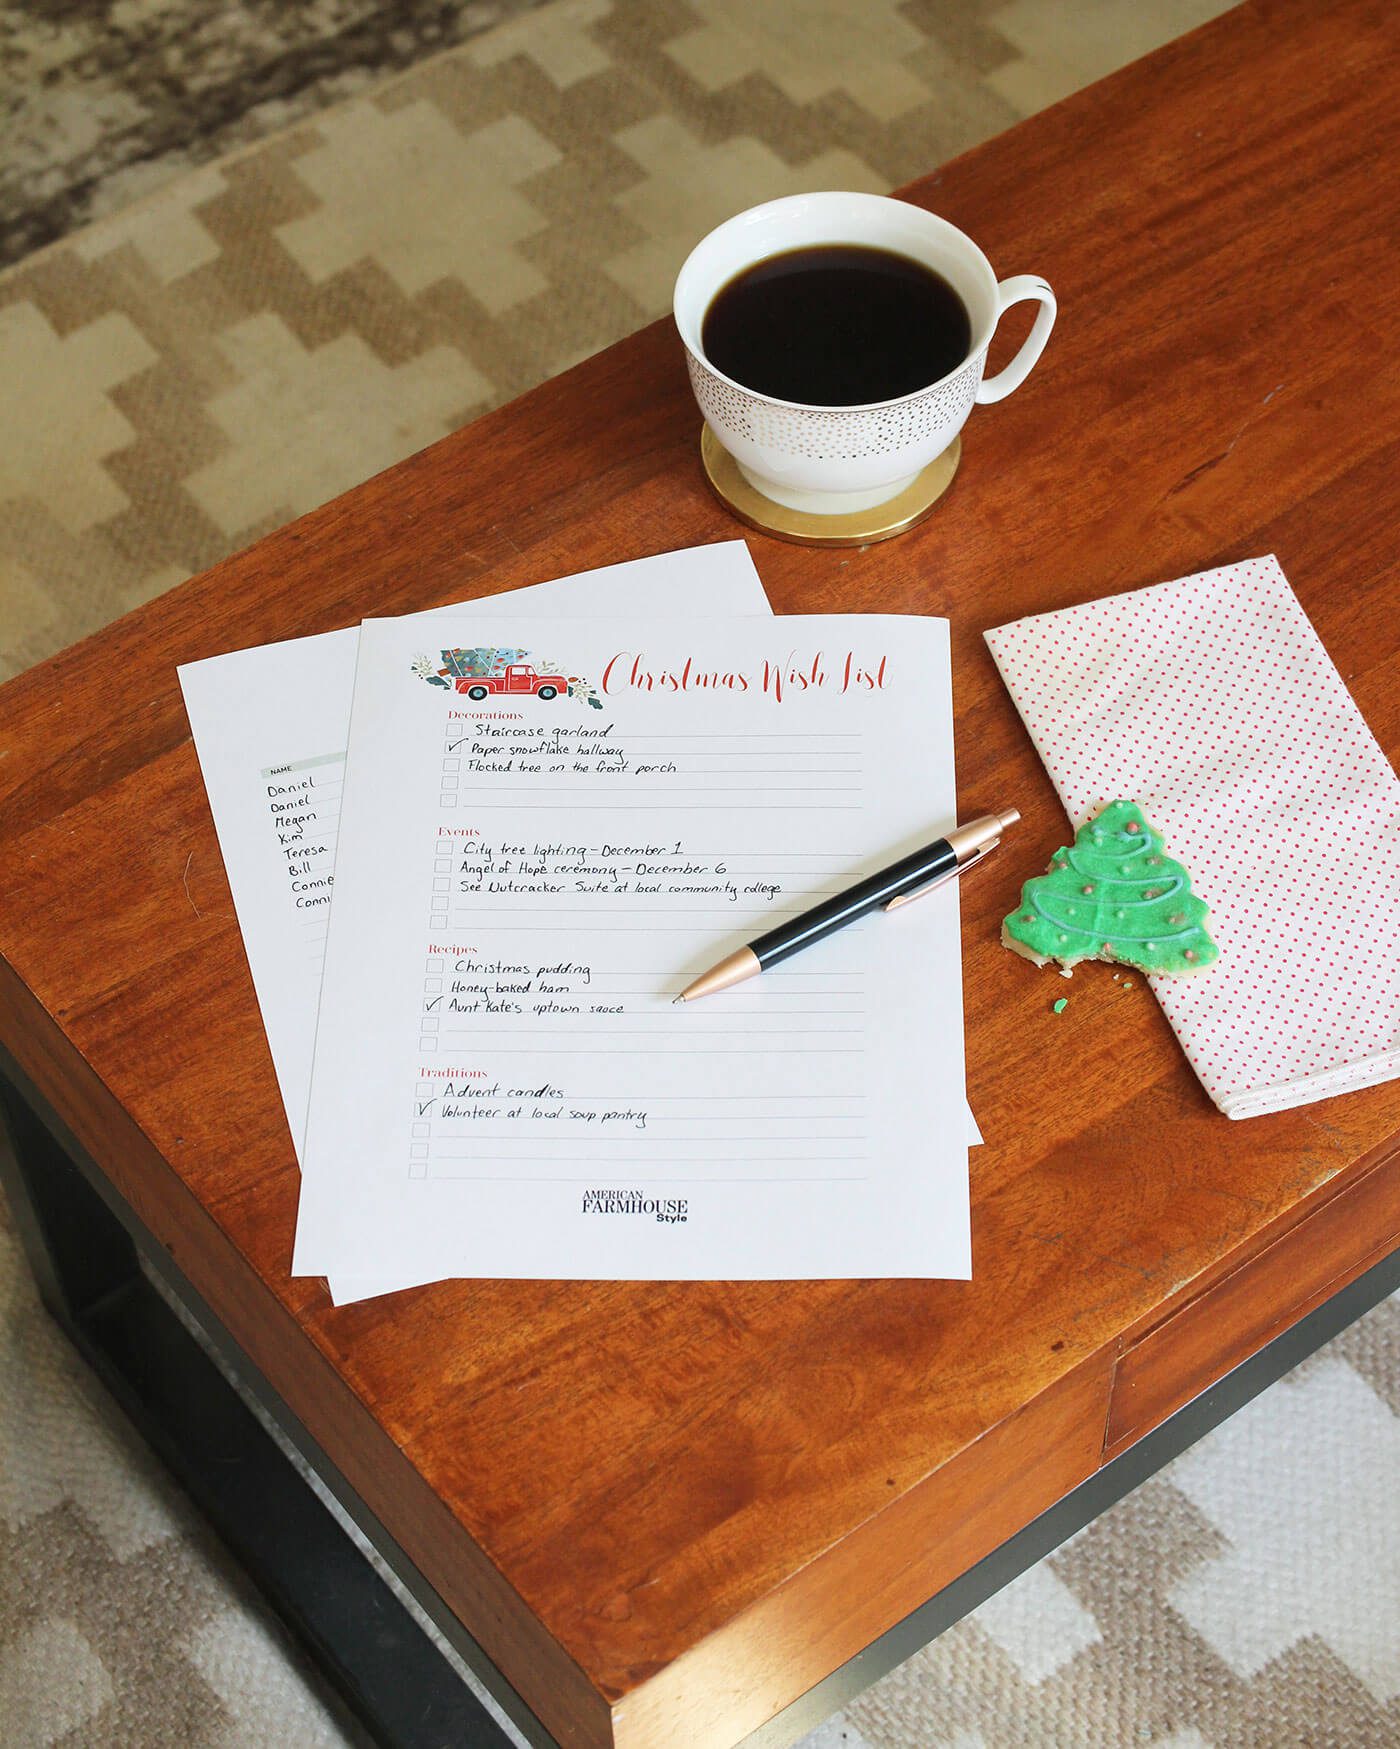 Christmas wish list half filled out on coffee table